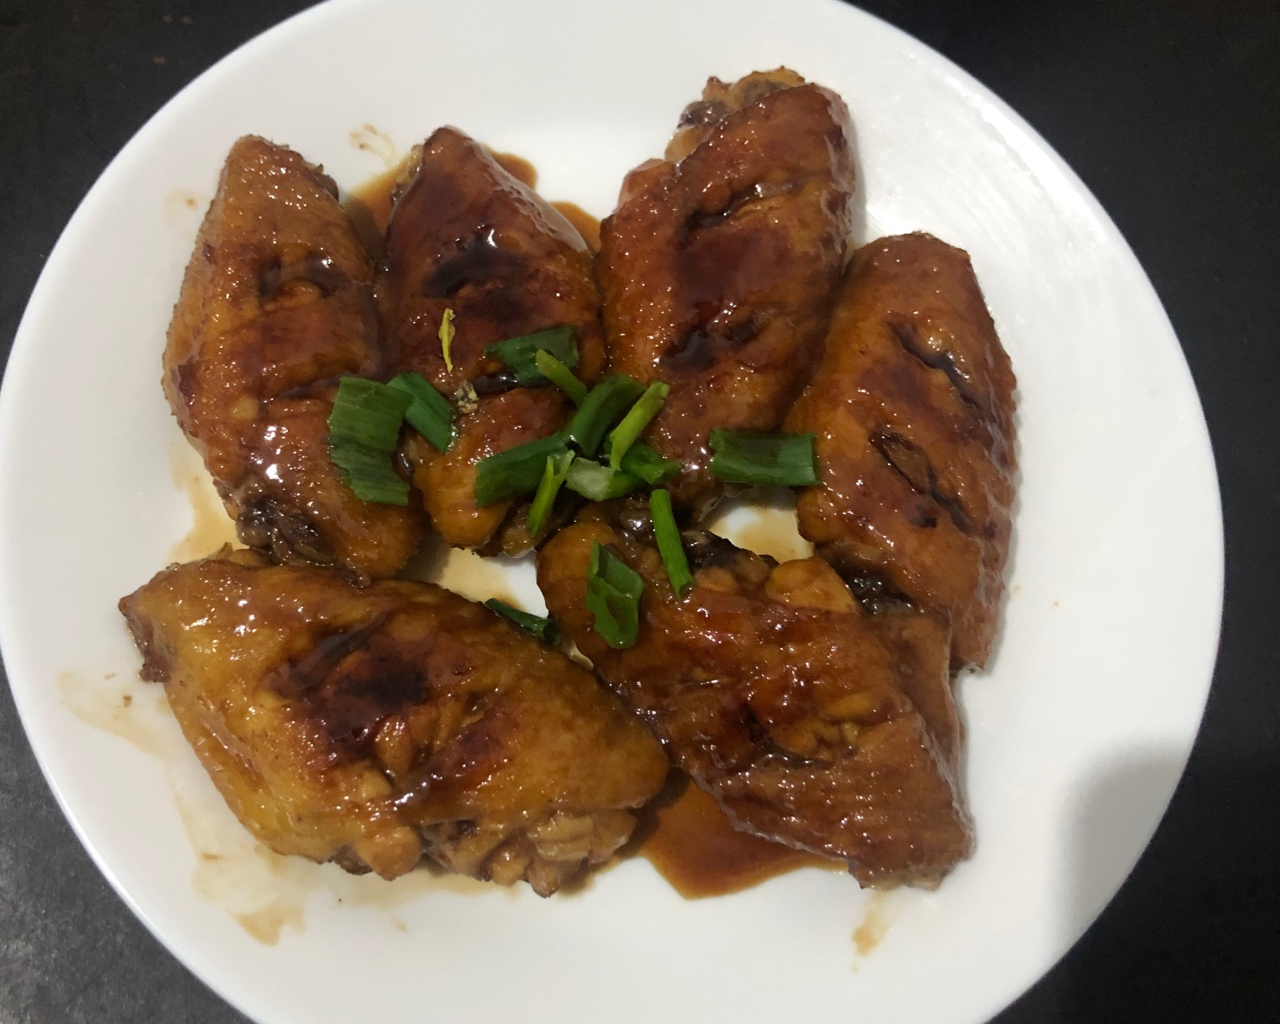 
The practice of coke chicken wing, how is coke chicken wing done delicious